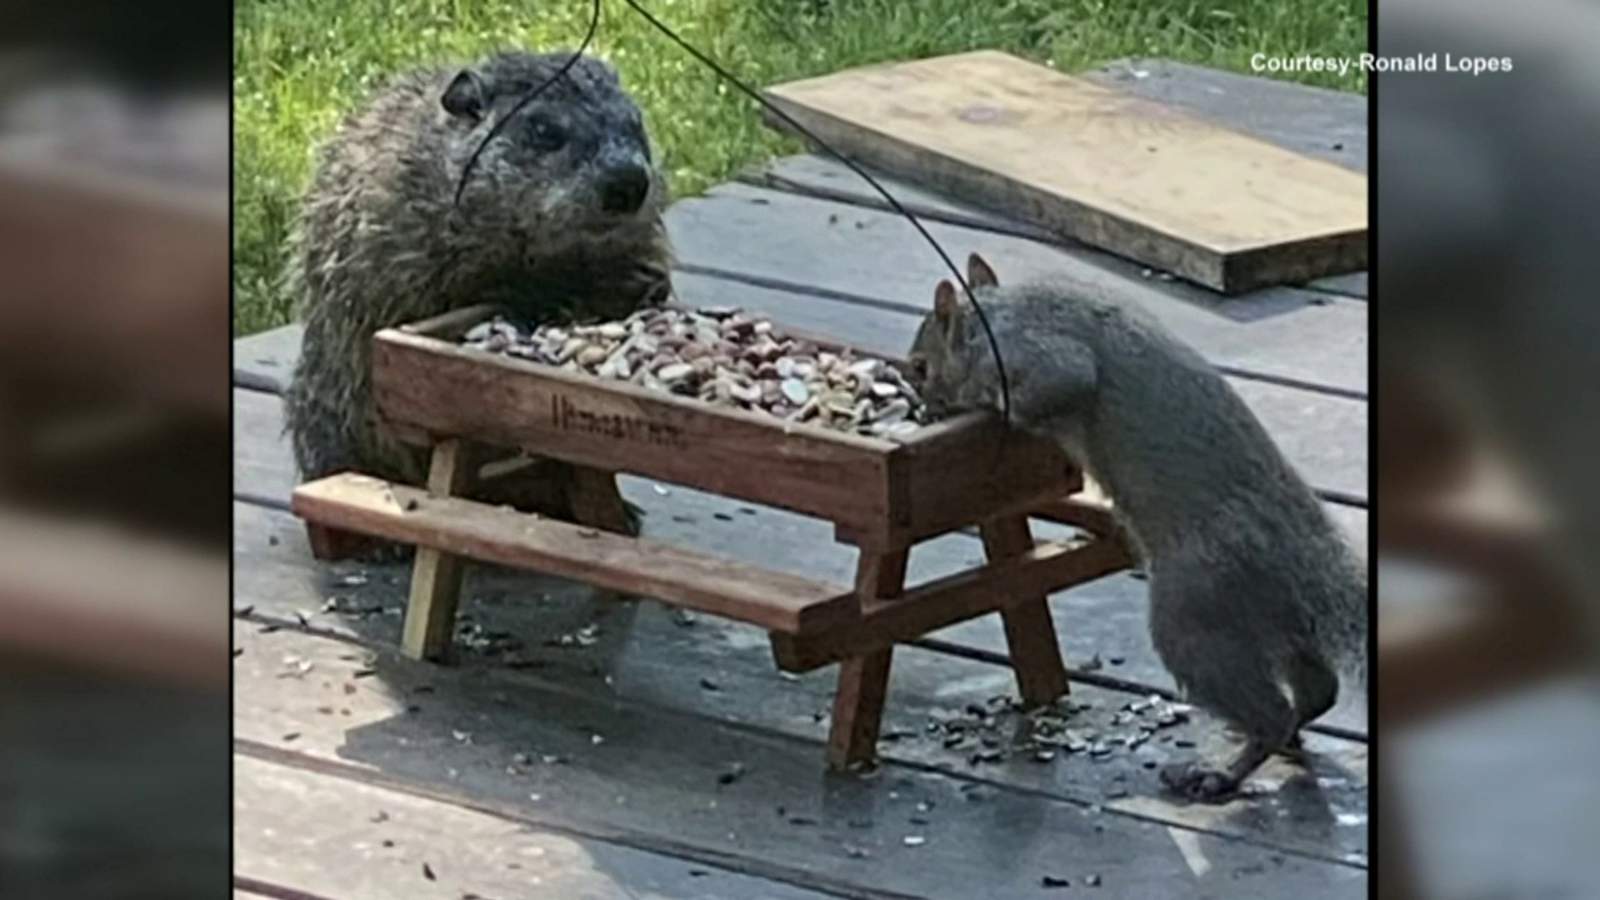 WATCH: Breakfast buddies share morning meals at tiny picnic table